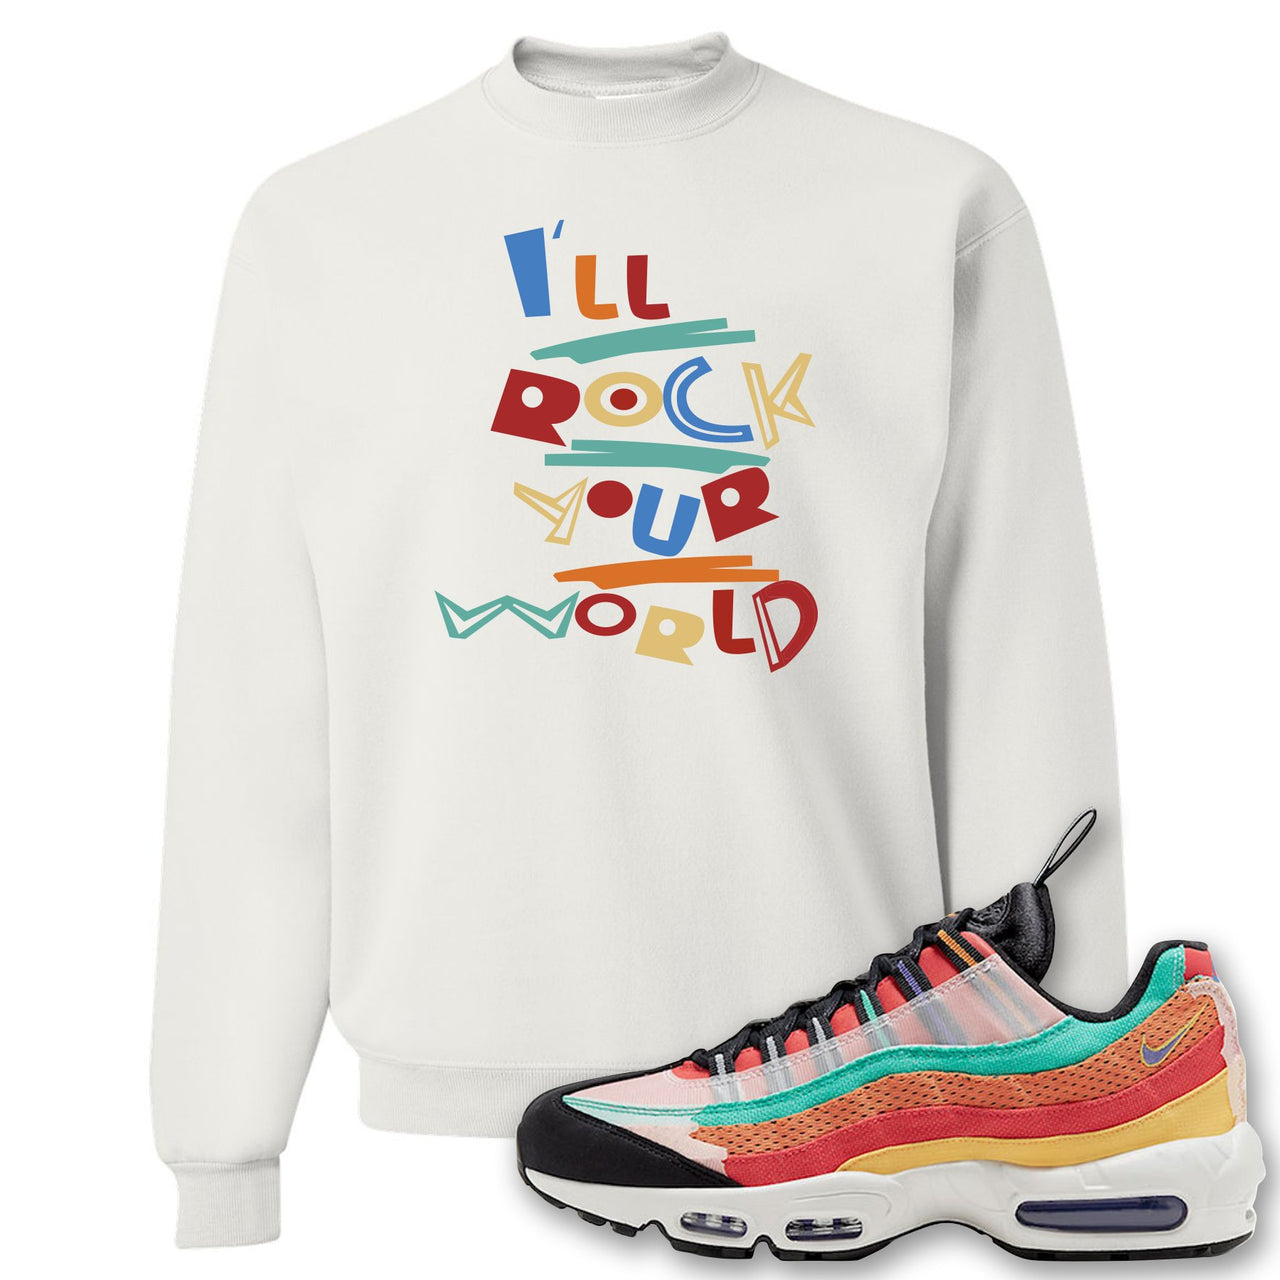 Air Max 95 Black History Month Sneaker White Crewneck Sweatshirt | Crewneck to match Nike Air Max 95 Black History Month Shoes | I'll Rock Your World